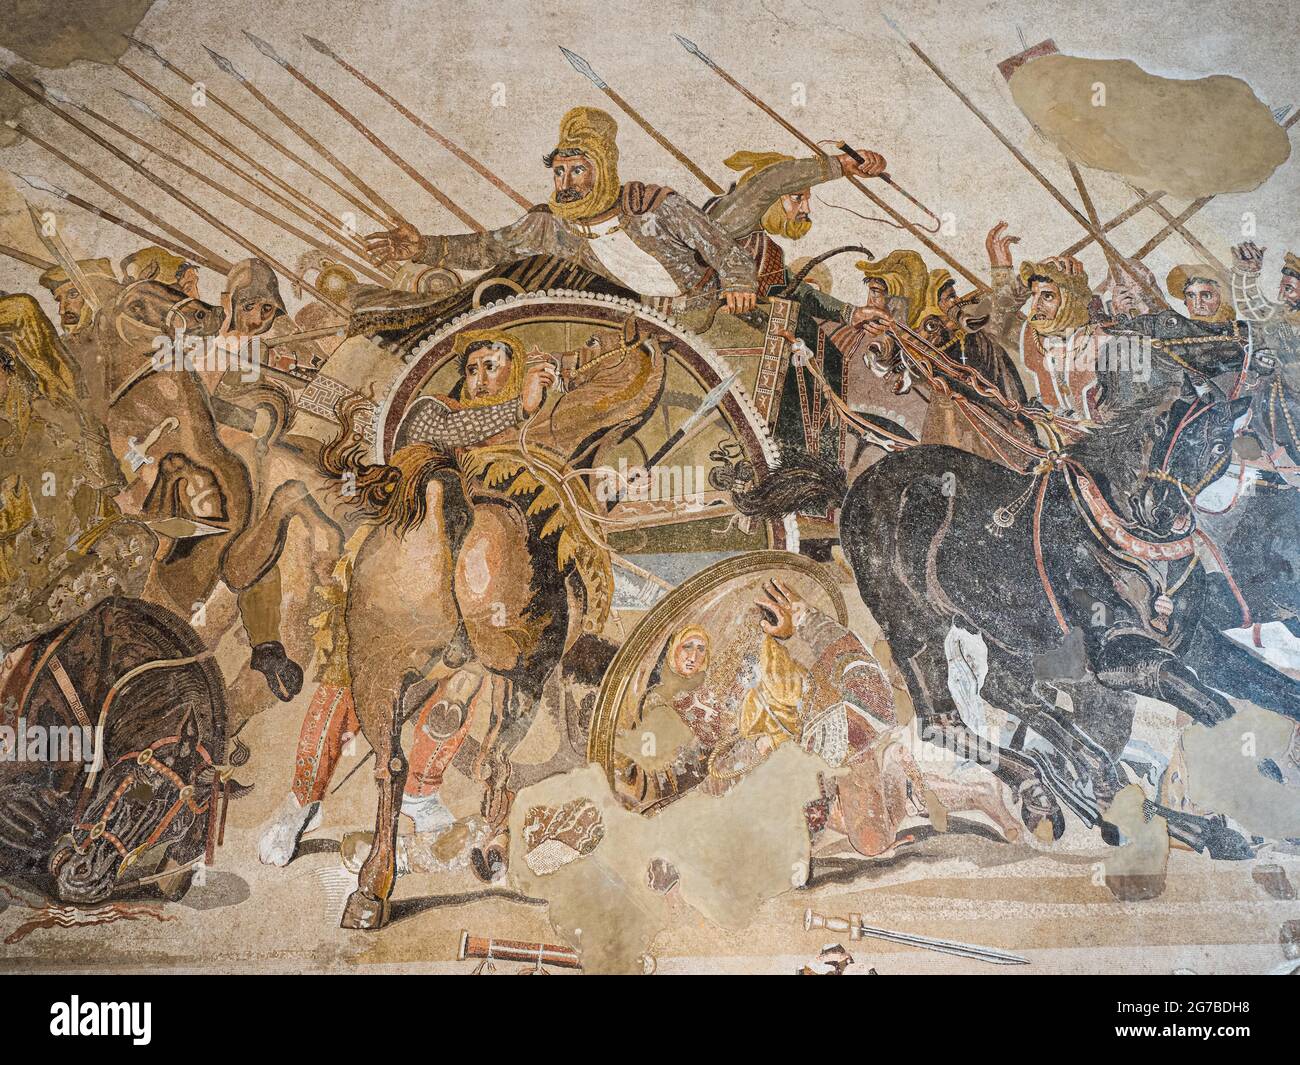 Battle of Alexander, Alexander Mosaic, Museu Archeologico Nazionale, National Archaeological Museum, Naples, Italy Stock Photo